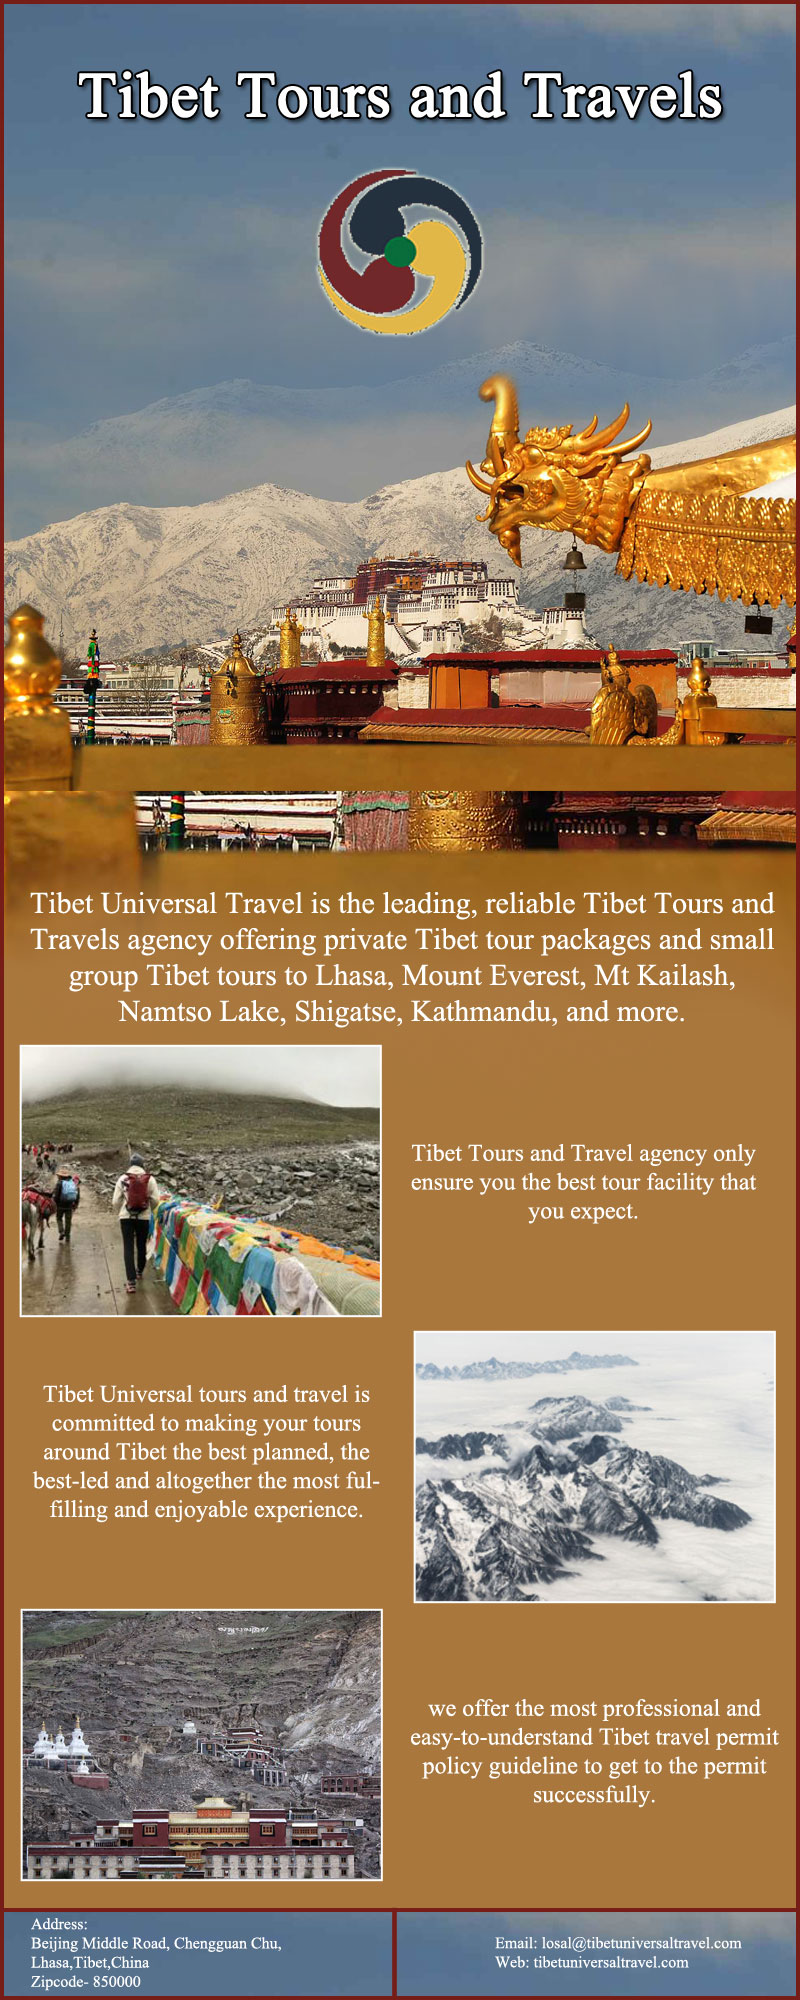 Tibet Tours and Travels Tibet Universal Travel is the leading, reliable Tibet Tours and Travels agency offering private Tibet tour packages and small group Tibet tours to Lhasa, Mount Everest, Mt Kailash, Namtso Lake, Shigatse, Kathmandu, and more. We are always committed to mak by tibettravelchina